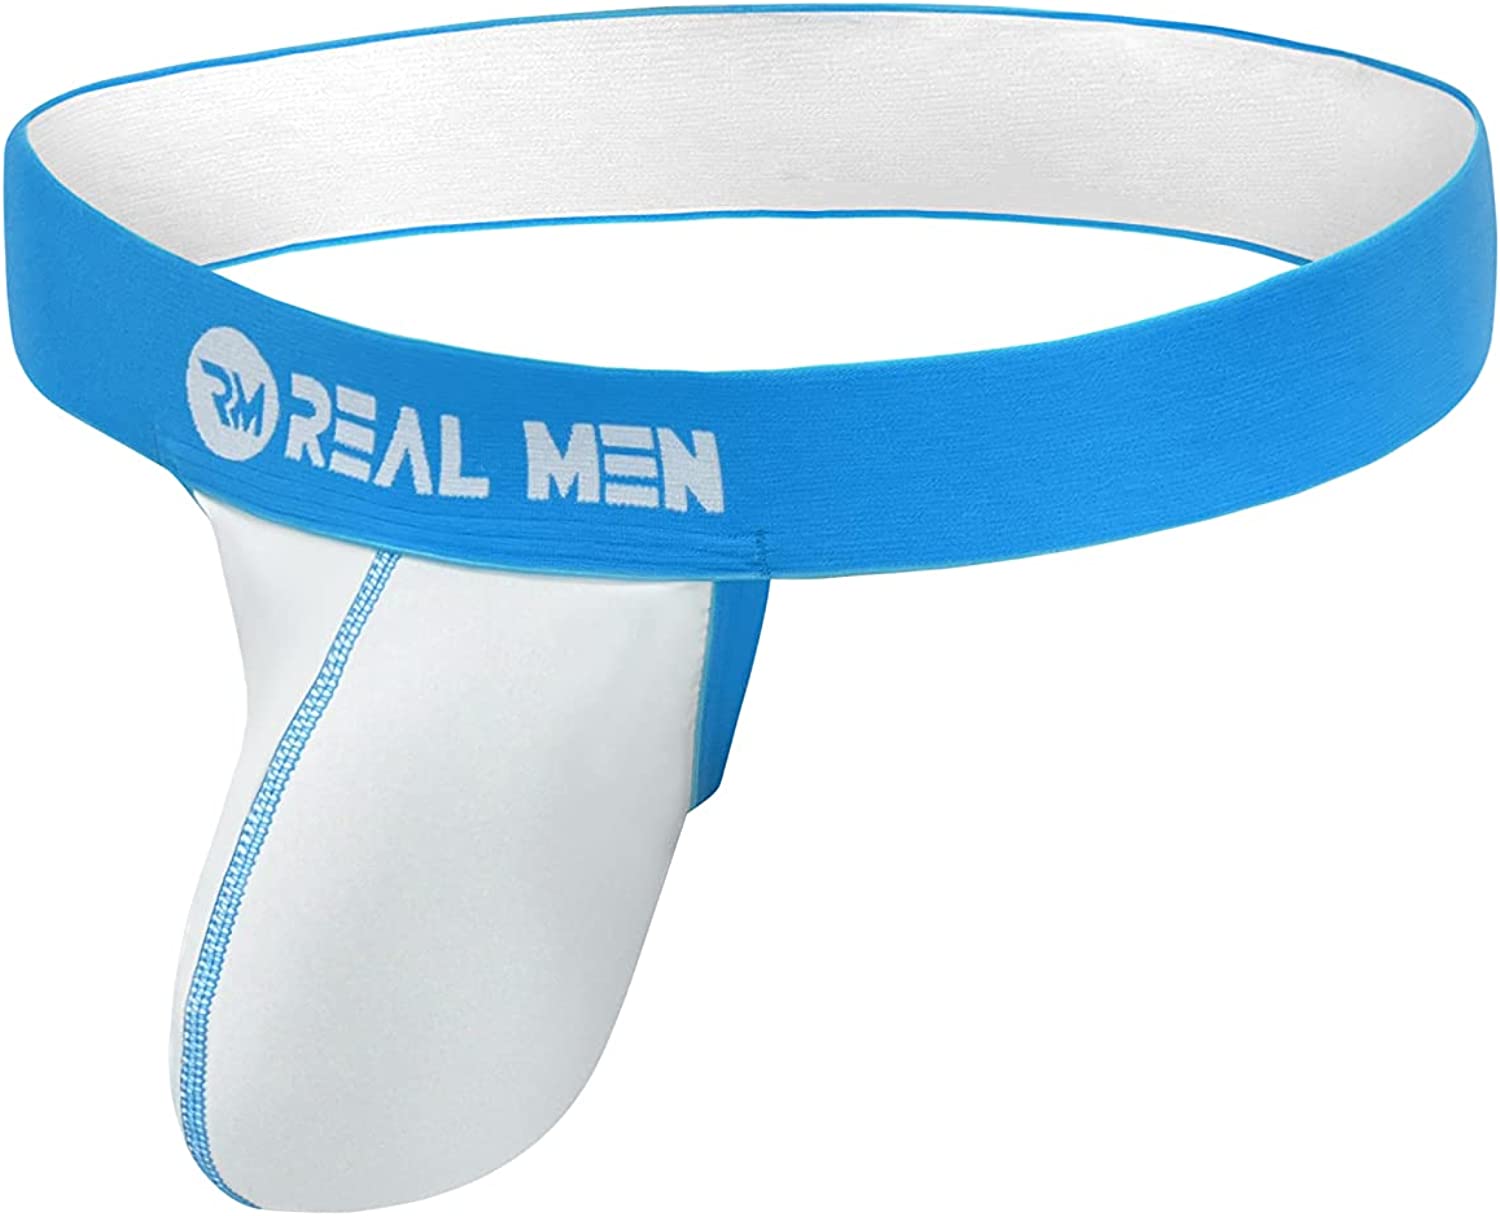 Real Men LIFT Pouch Jock Strap - Vasectomy Support Underwear - Athletic ...